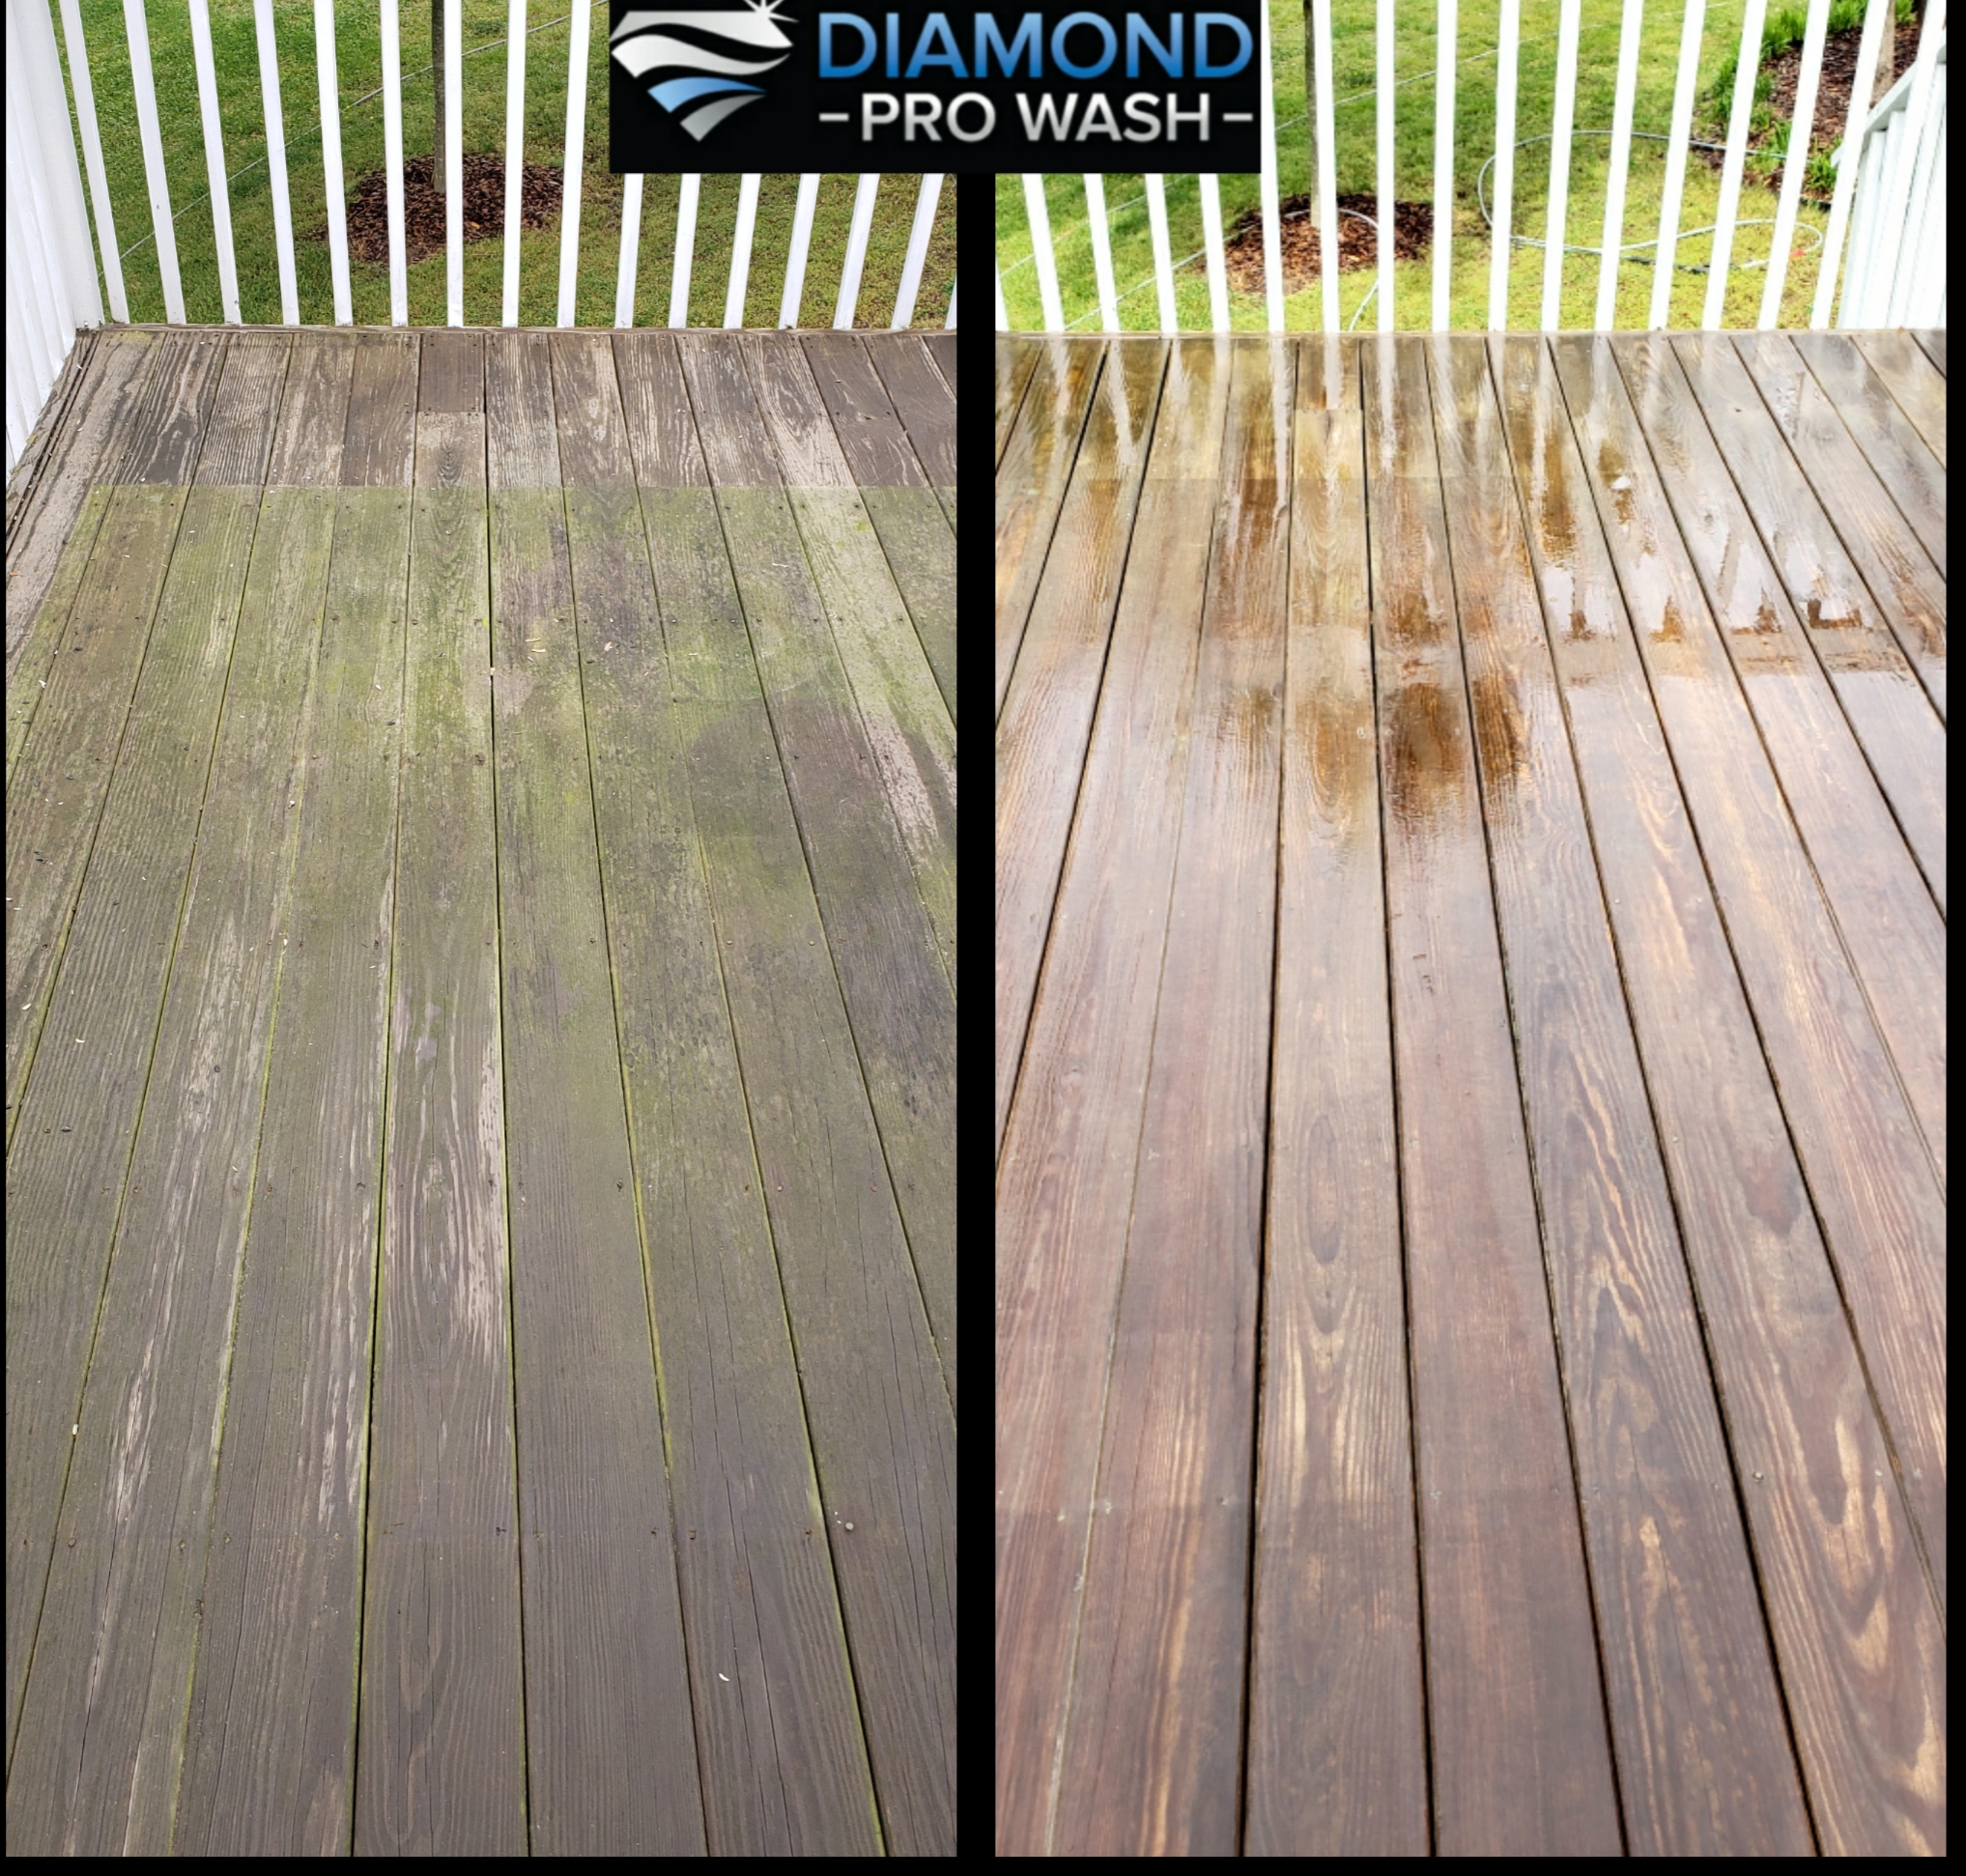 Deck and Patio Cleaning Greensboro NC